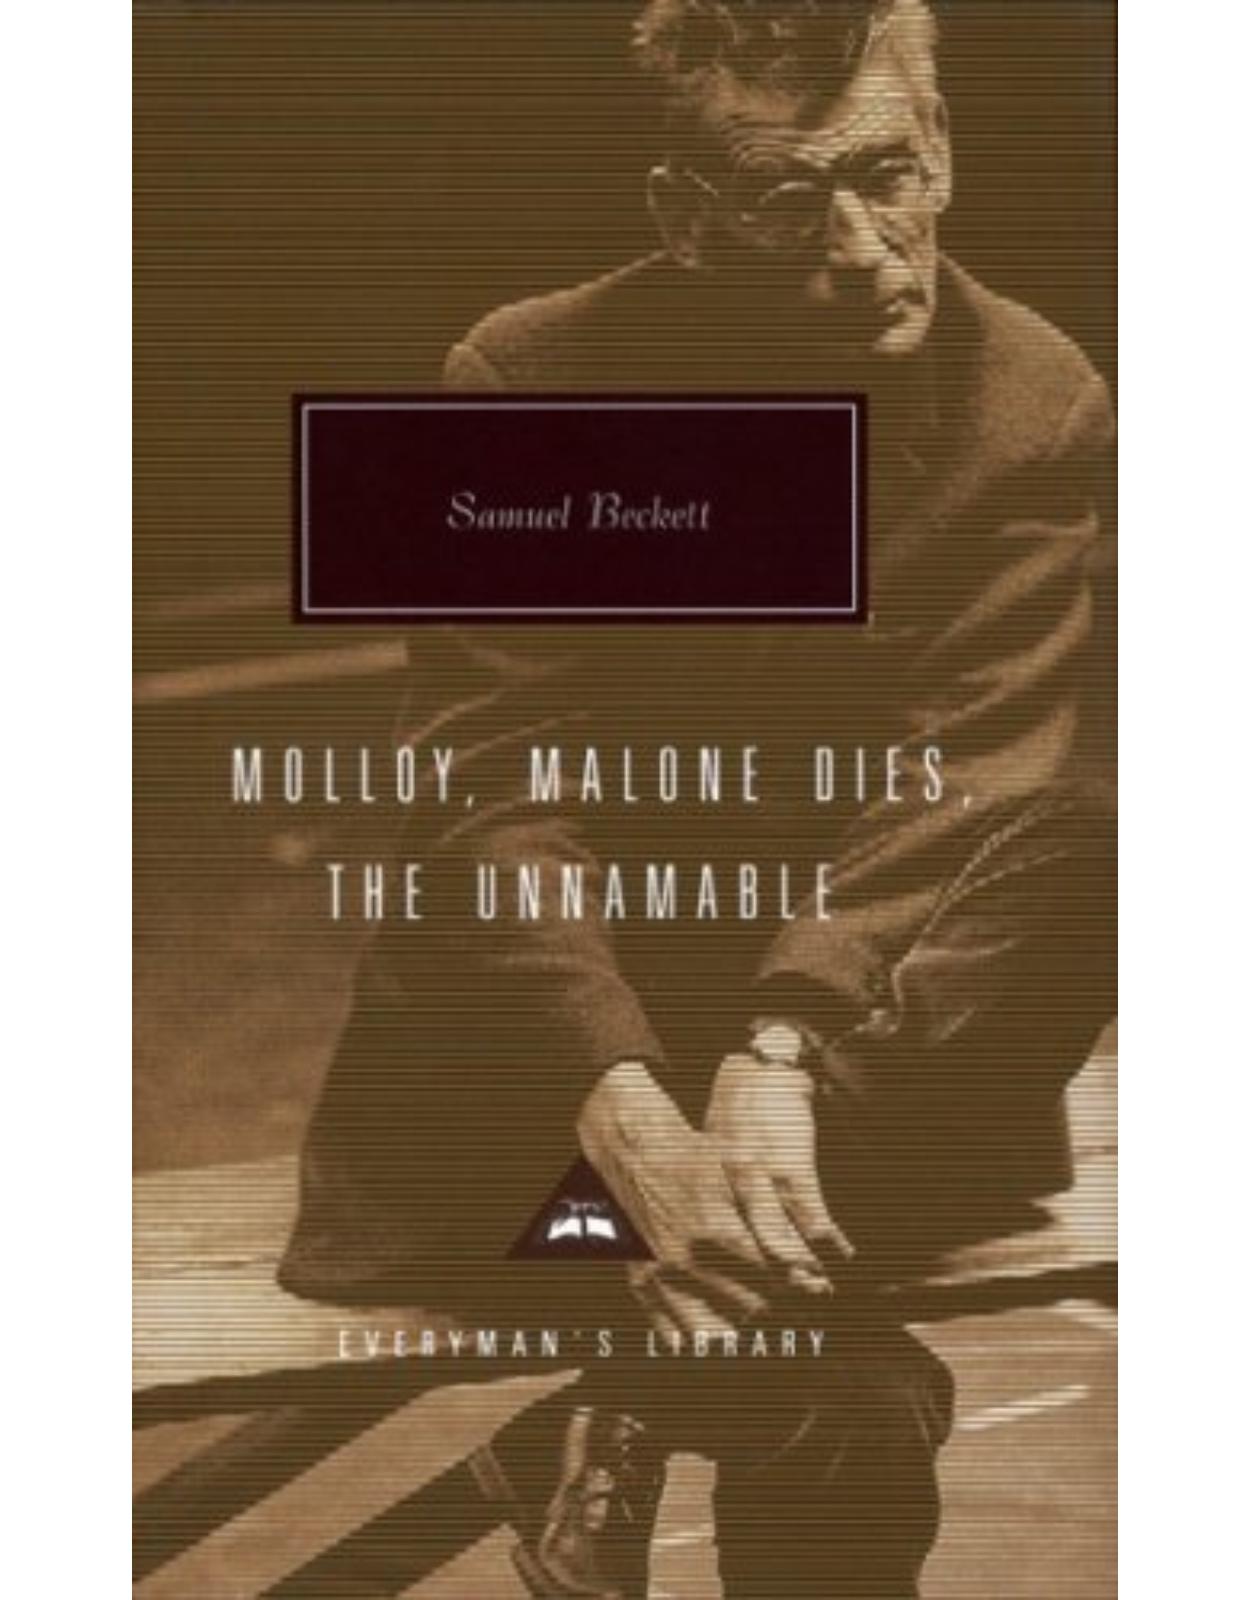 Samuel Beckett Trilogy: Molloy, Malone Dies and The Unnamable